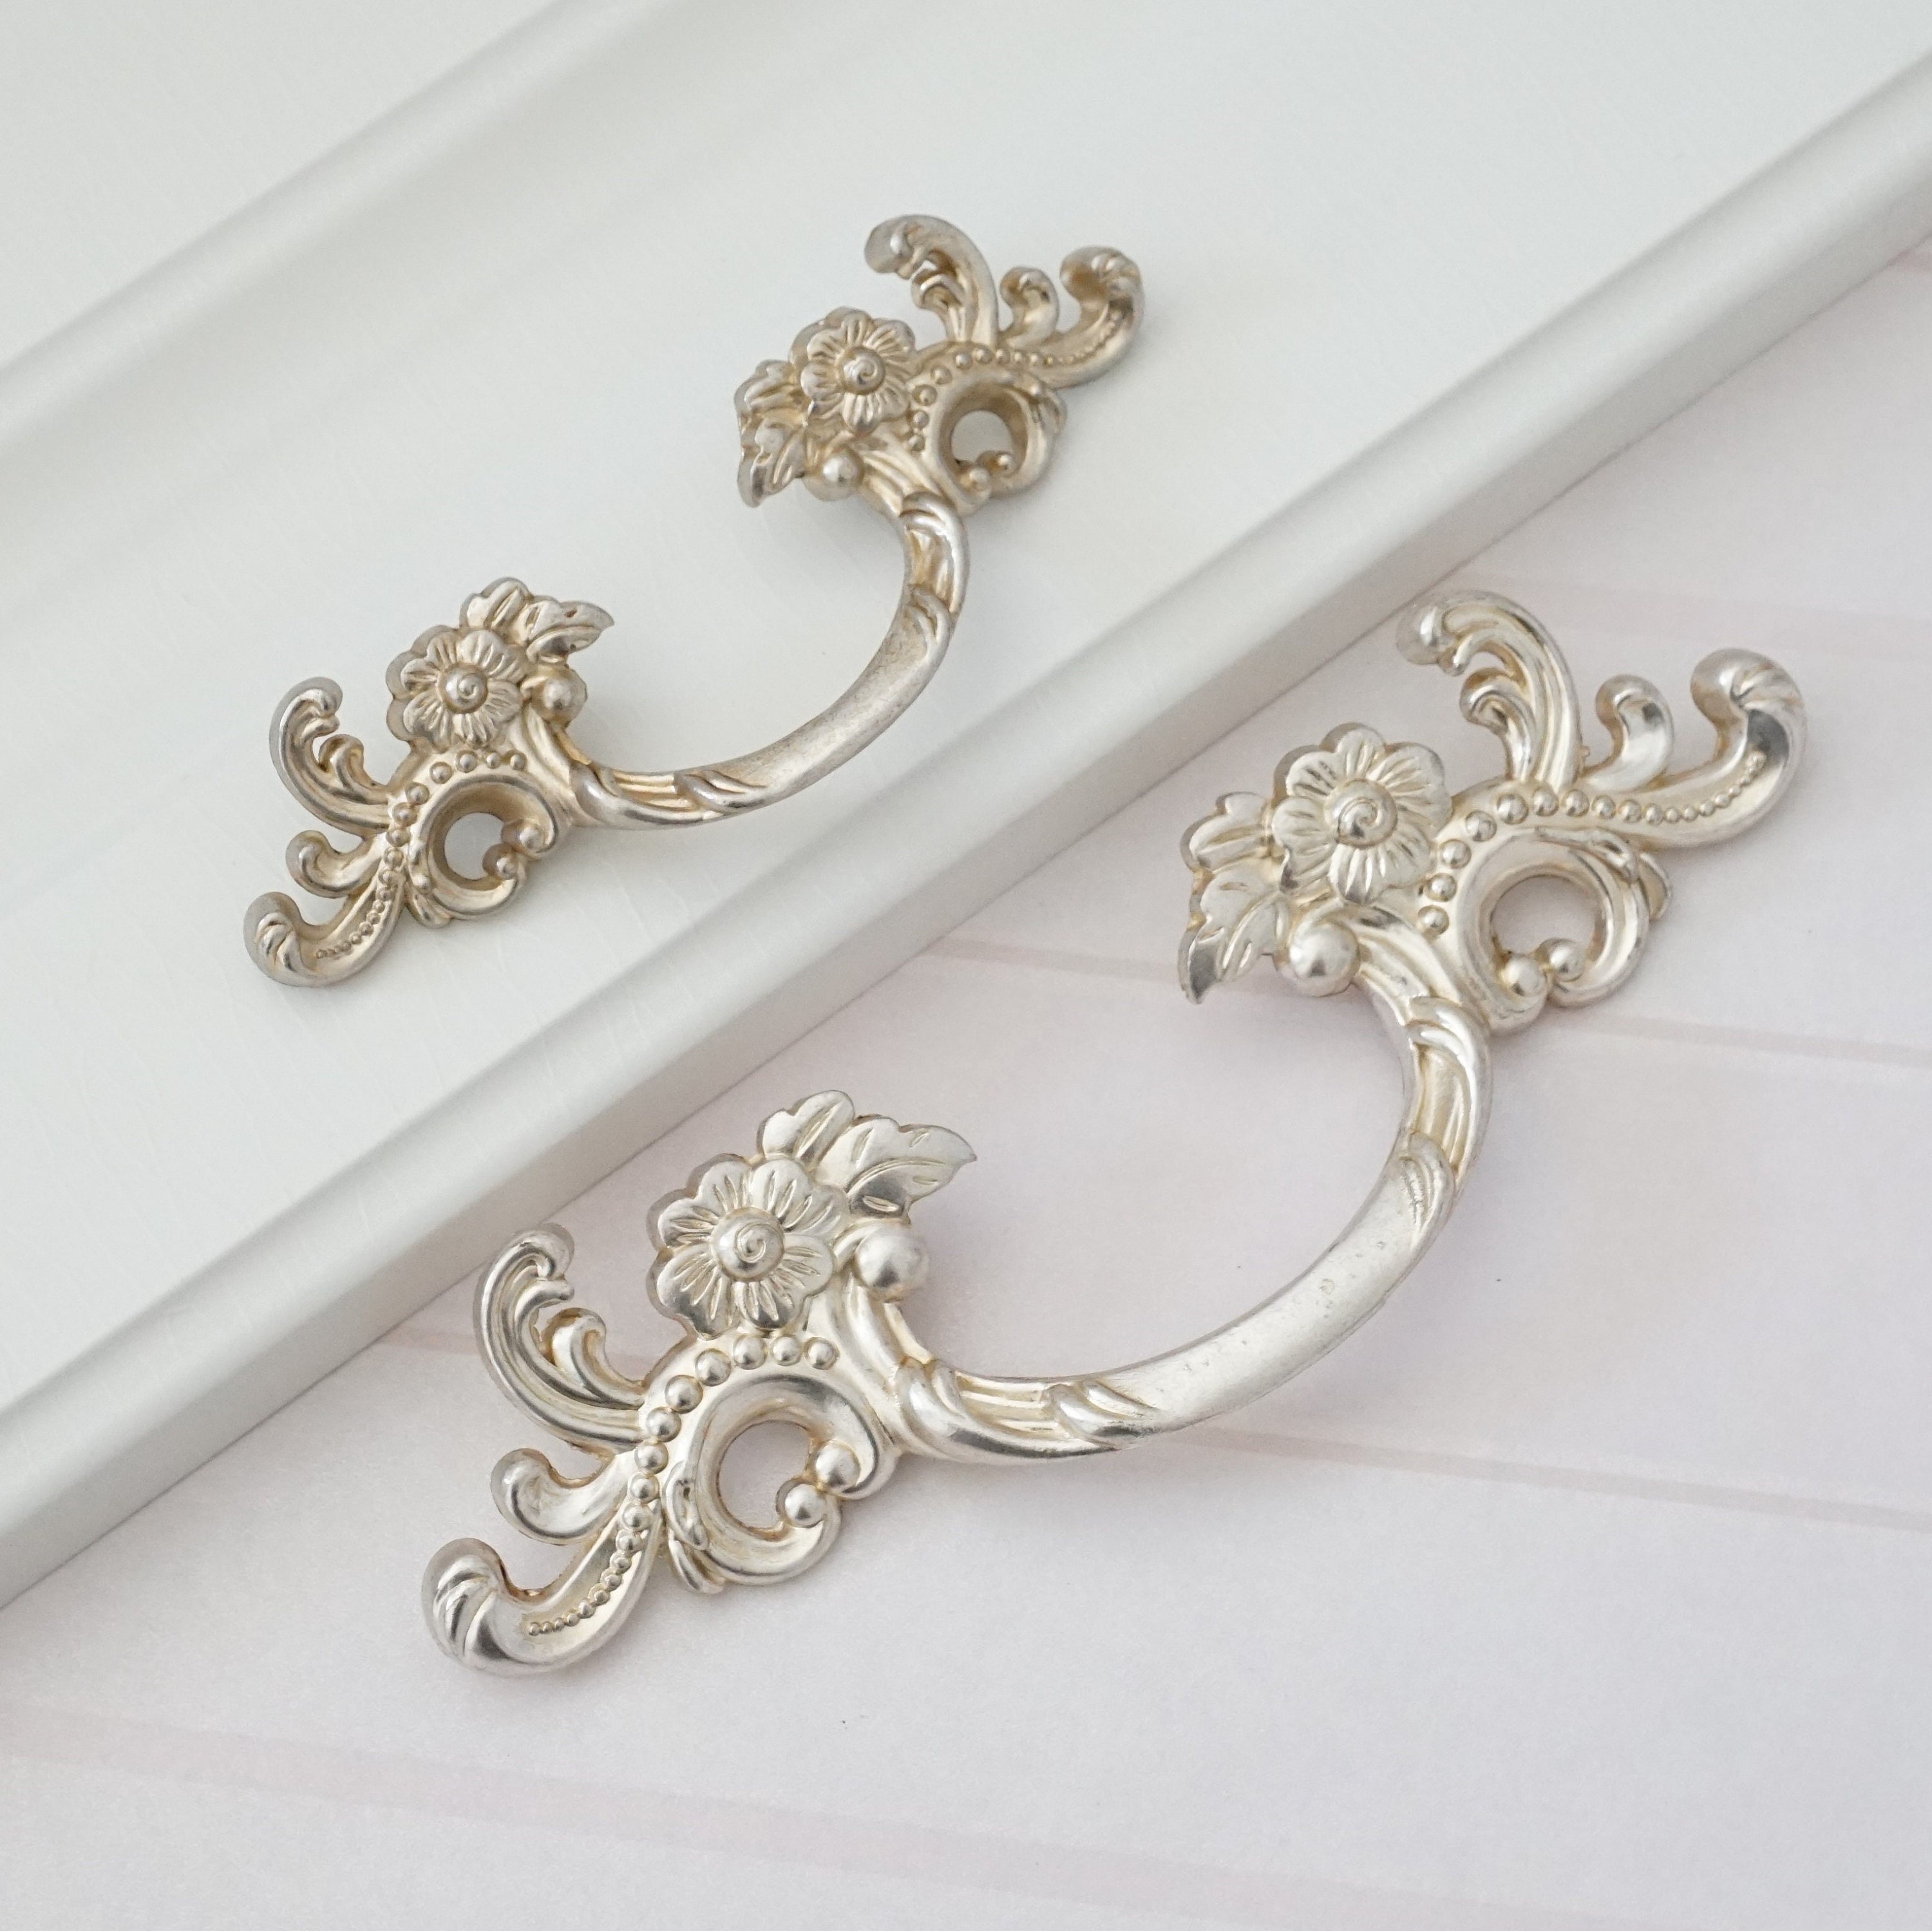 1.75 2.5 Shabby Chic Dresser Pull Drawer Pulls Door Handles Antique Silver  French Vintage Cabinet Knobs Handle 44 64 Mm 